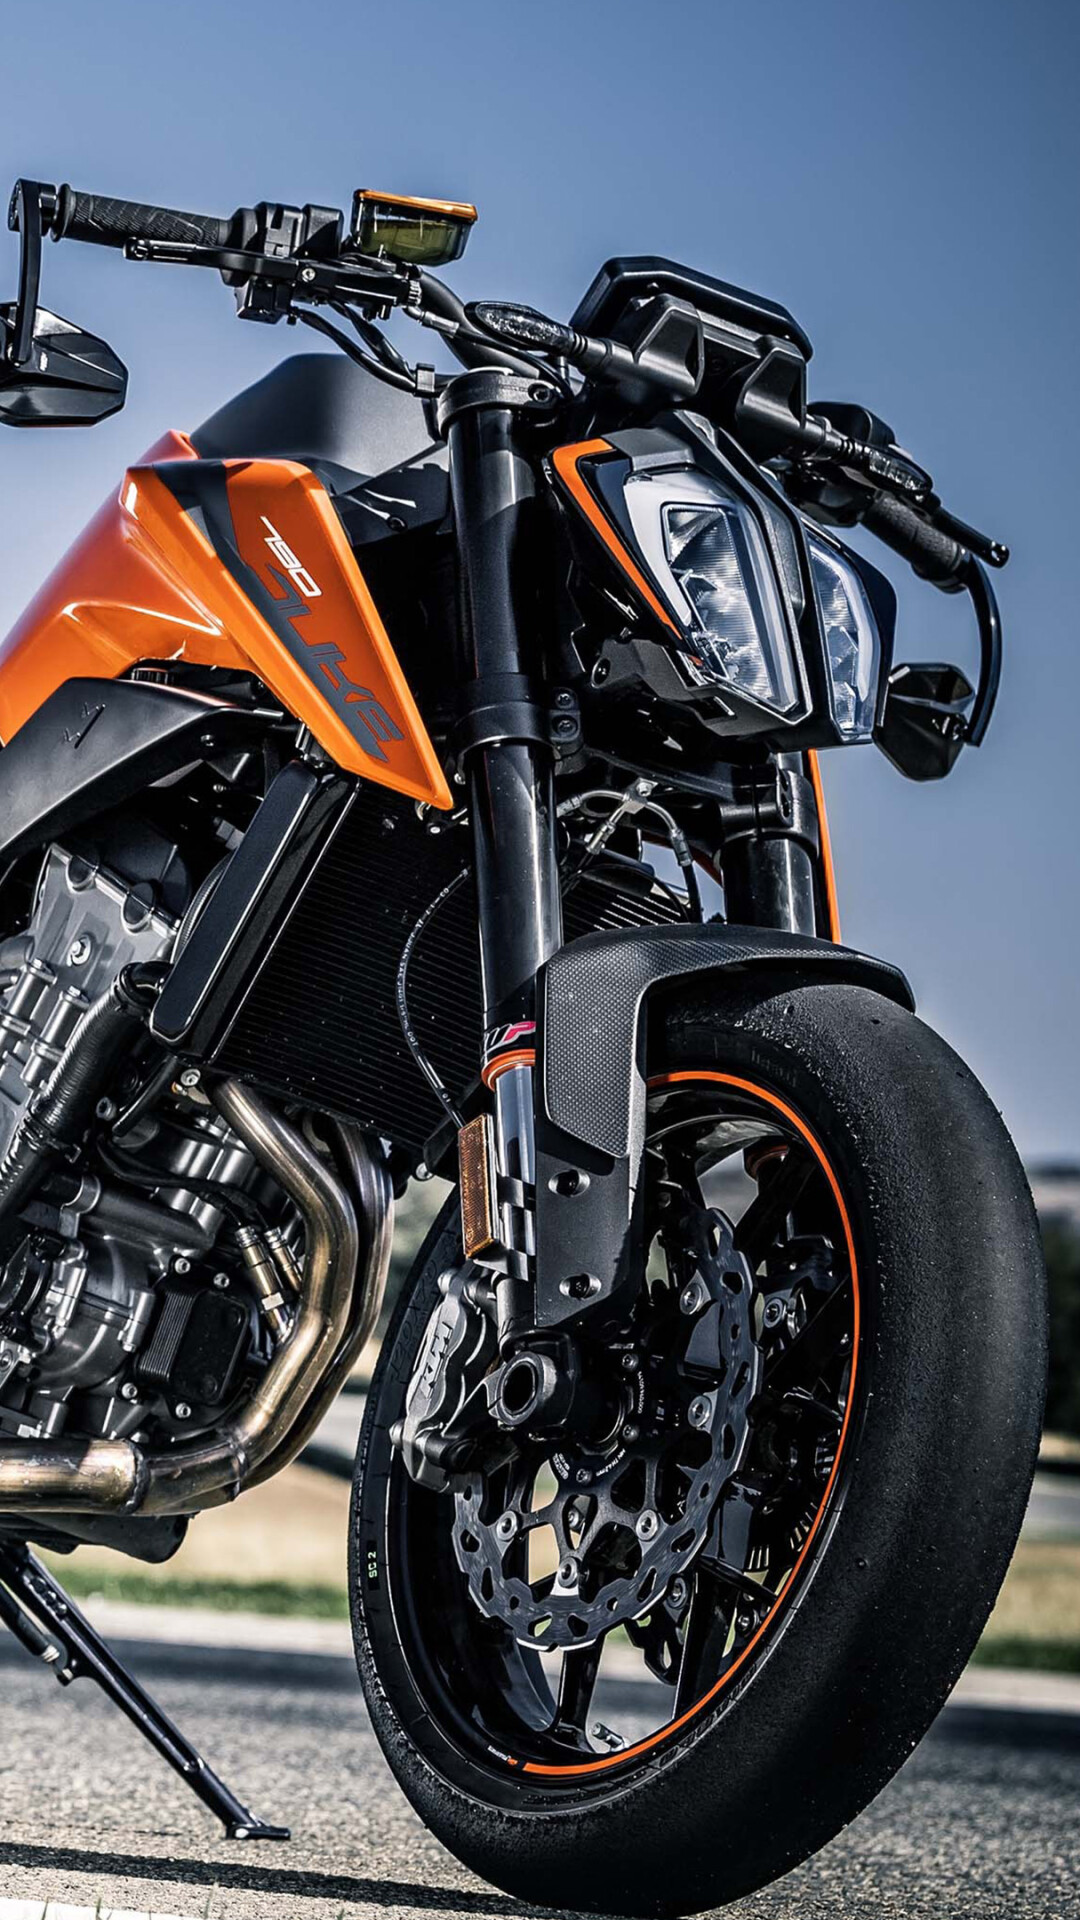 KTM vehicles, Speed and power, Exciting adventures, Auto enthusiasts, 1080x1920 Full HD Phone